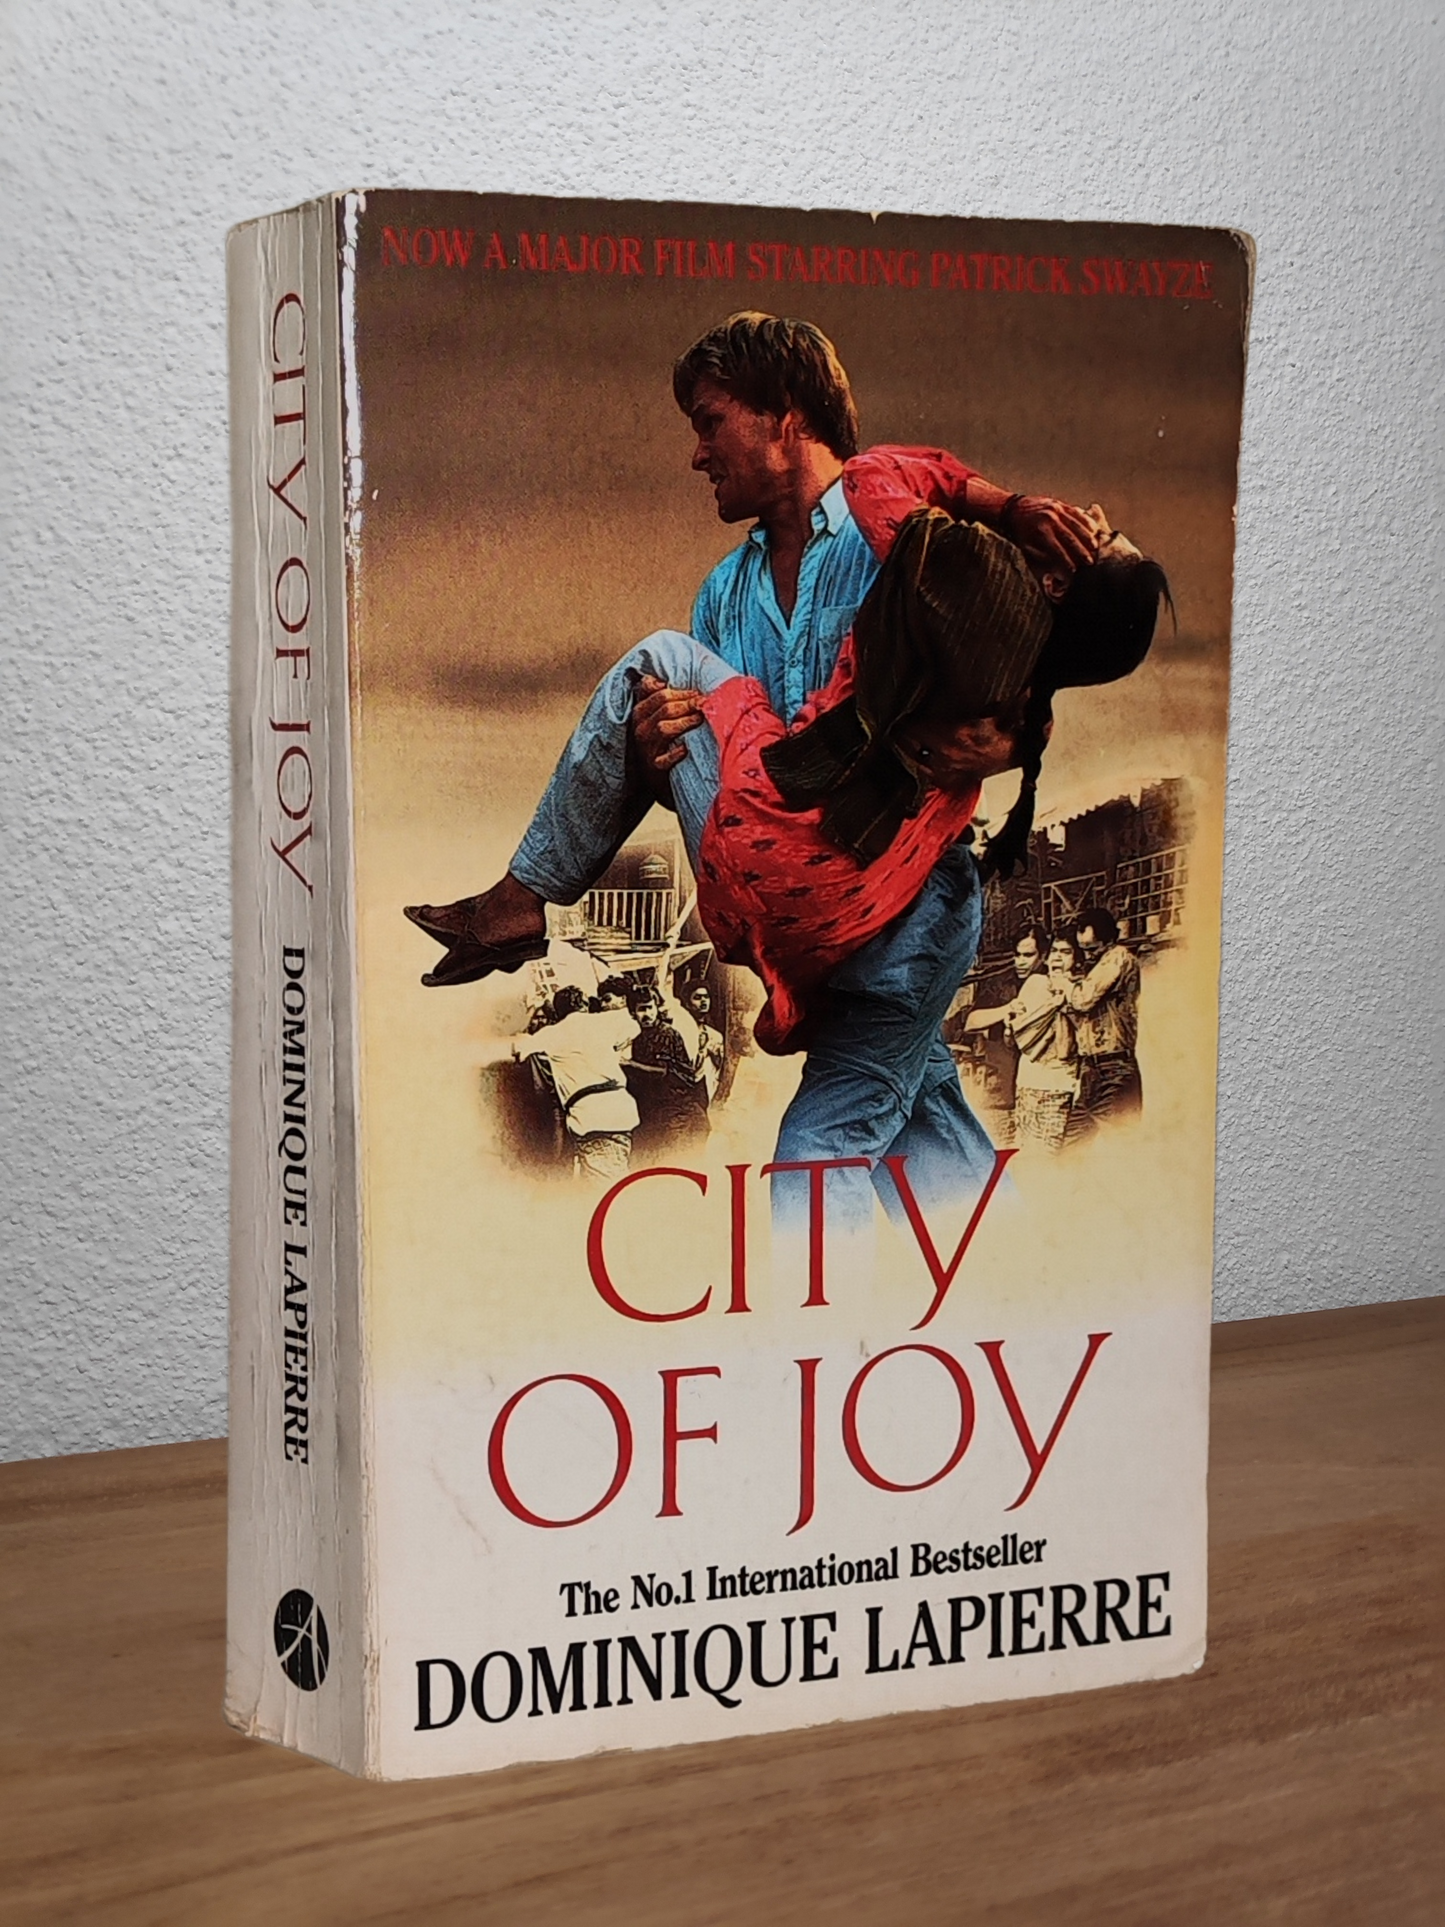 Dominique LaPierre - City of Joy   - Second-hand english book to deliver in Zurich & Switzerland